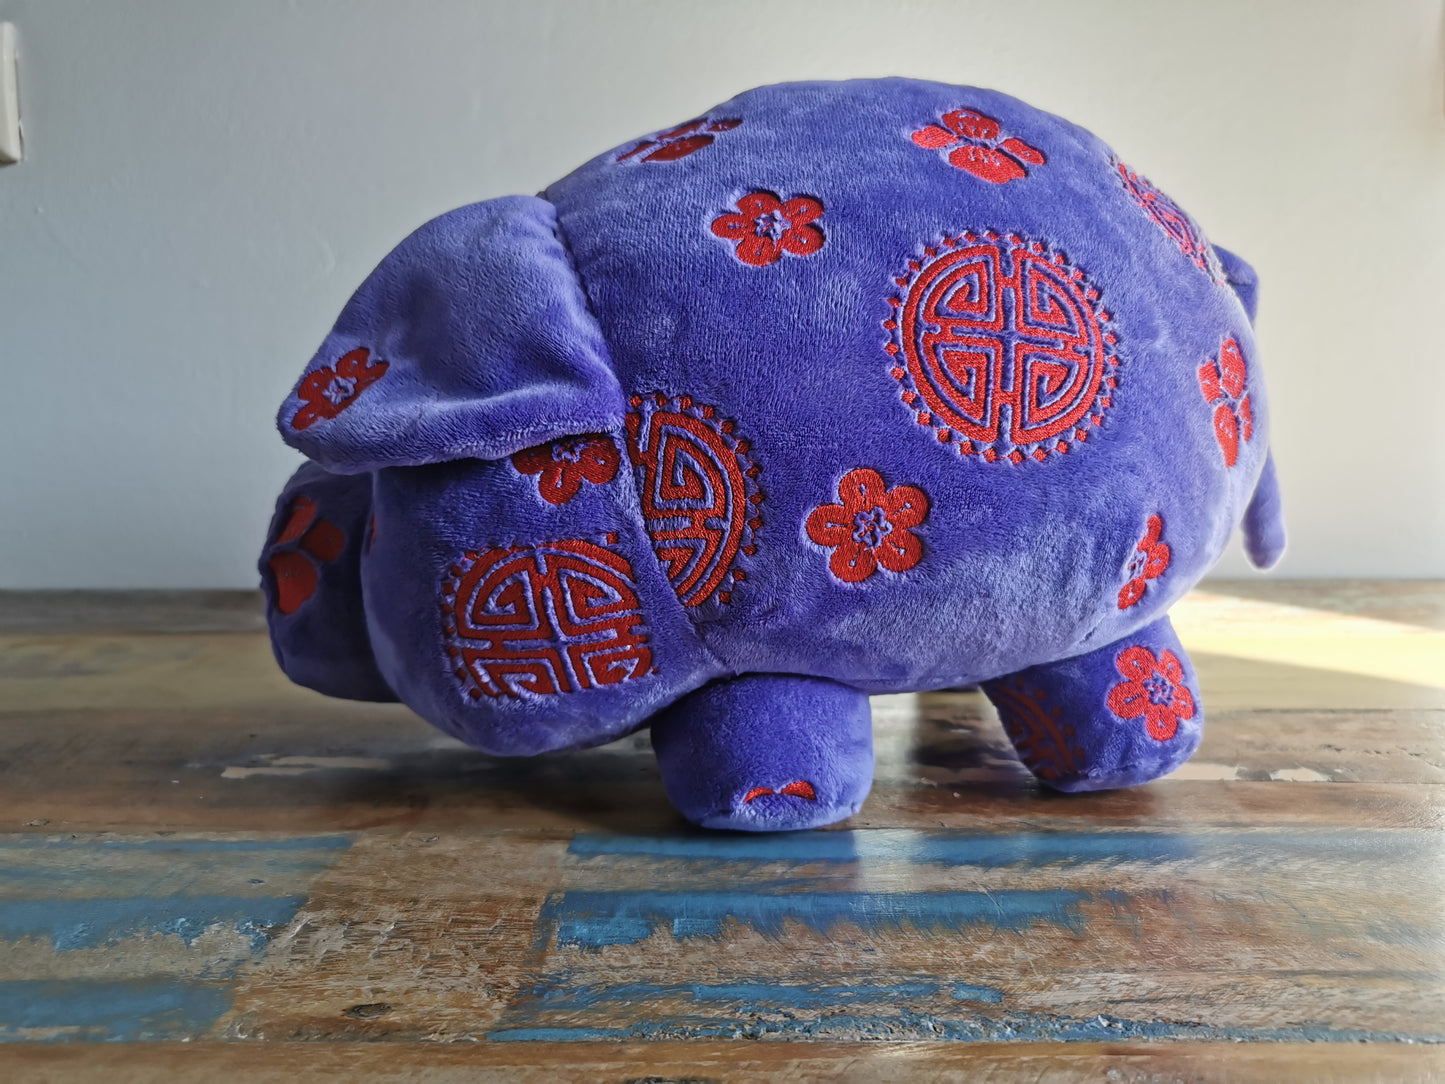 New Year Piggy, custom embroidery plush pig, personalized gift 40 cm